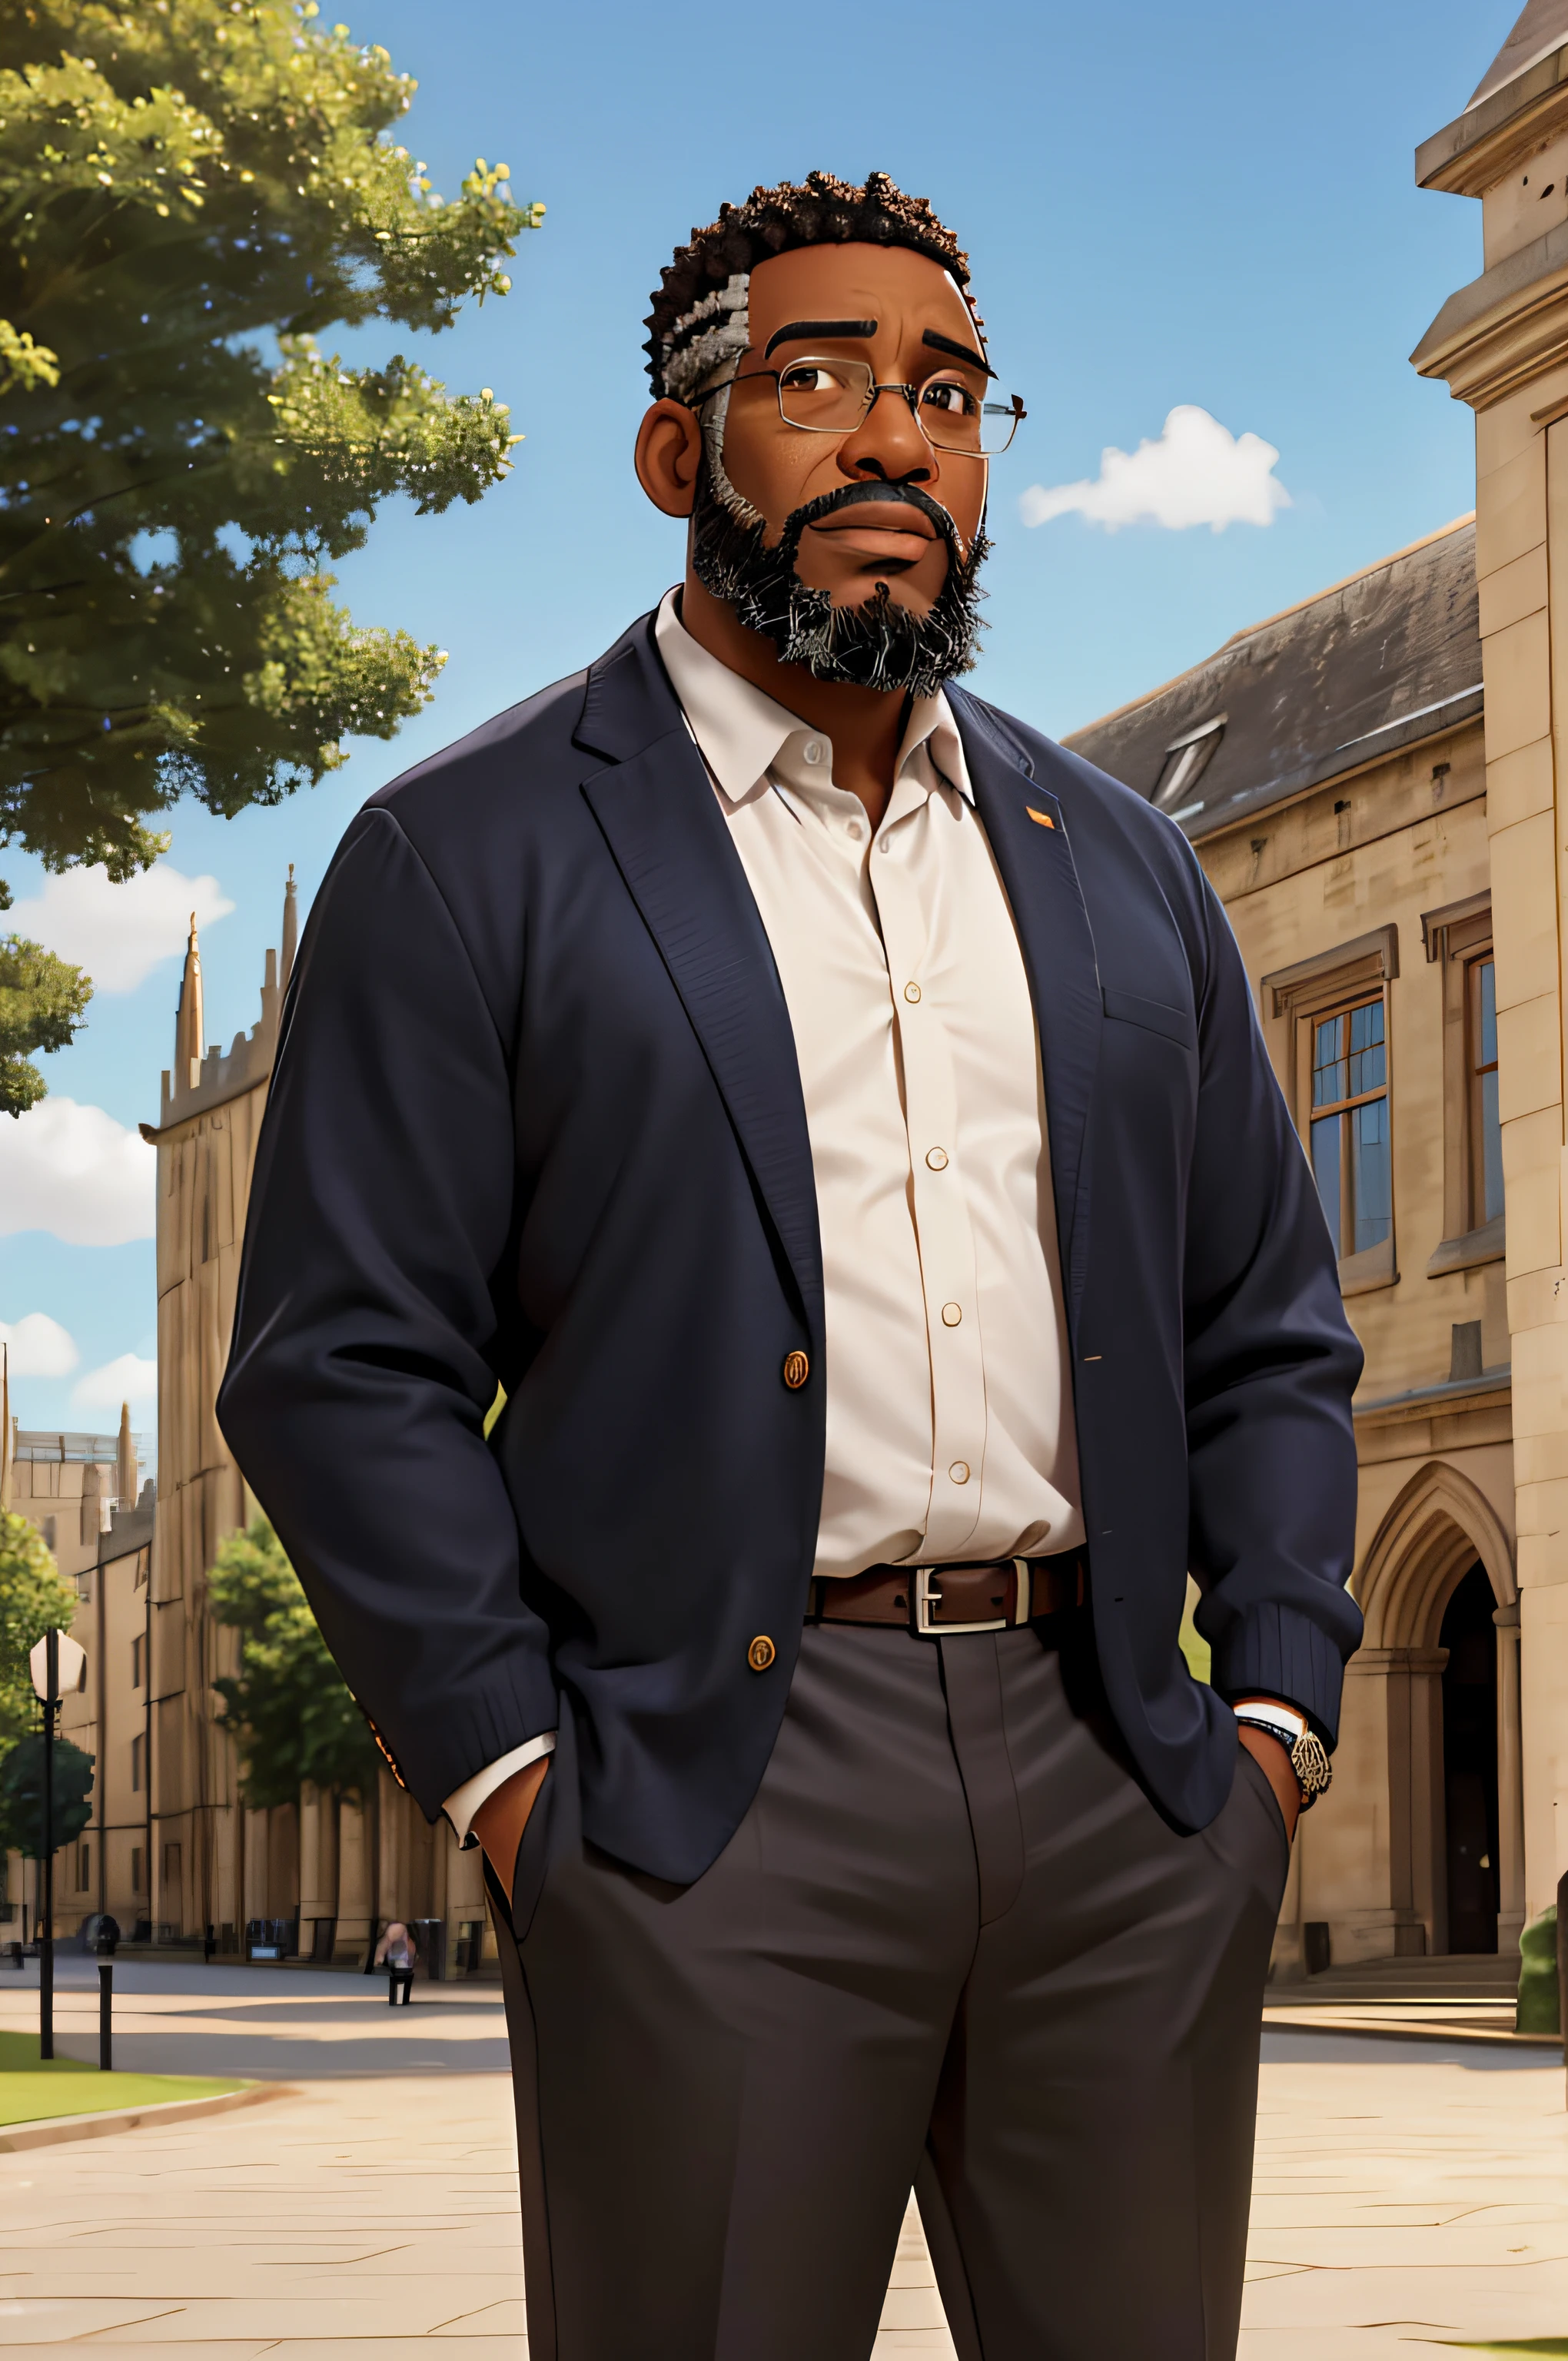 a Black man, Wise, elegant and intellectual, Standing in front, Looking at the Viewer, Short and curly Hair, modern clothing, slightly overweight, short beard, looking 60 years old, some gray hairs in his beard and hair, half pants, illuminated on a sunny day, with the front of Oxford University as a backdrop.